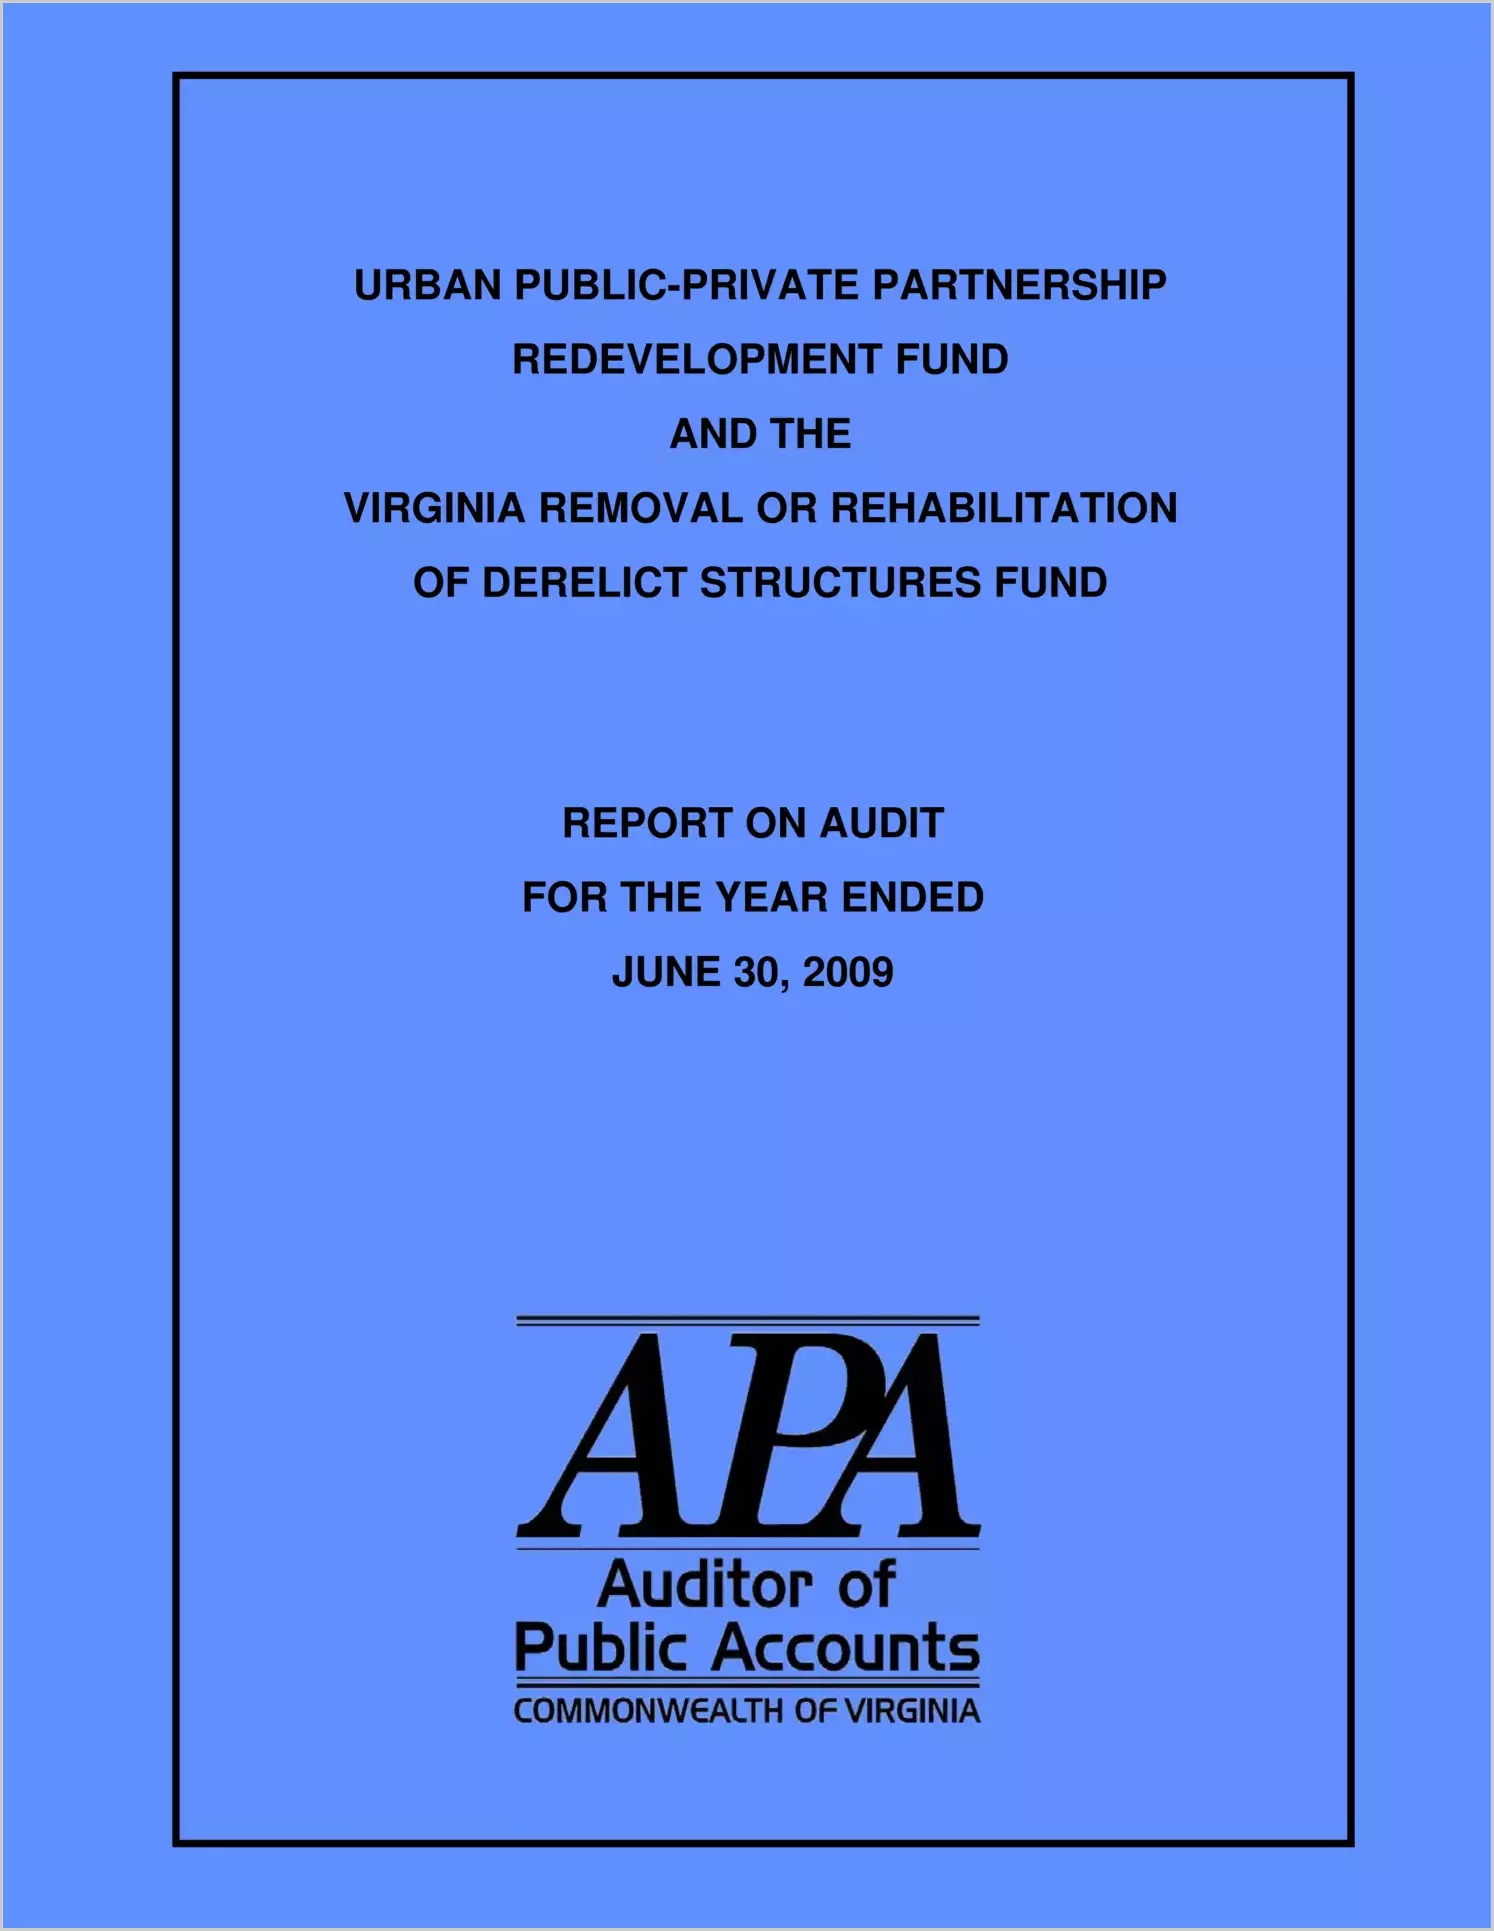 Urban Public-Private Partnership Redevelopment Fund and the Virginia Removal or Rehabilitation of Derelict Structures Fund for the year ended June 30, 2009